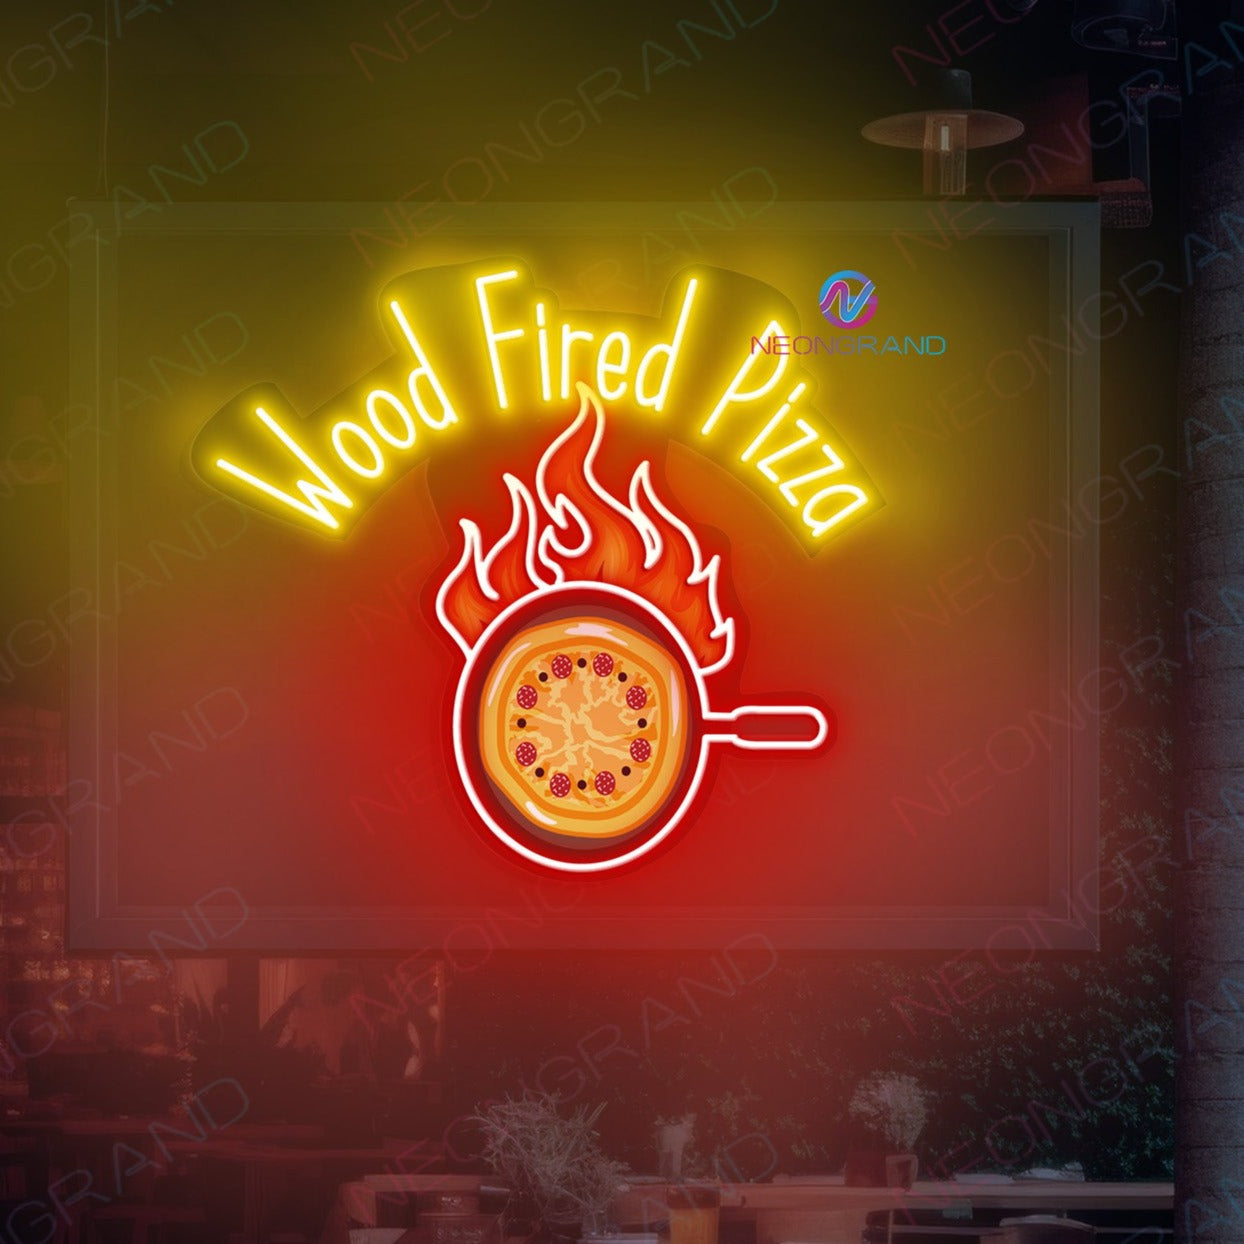 Wood Fired Pizza Neon Sign Kitchen Led Light